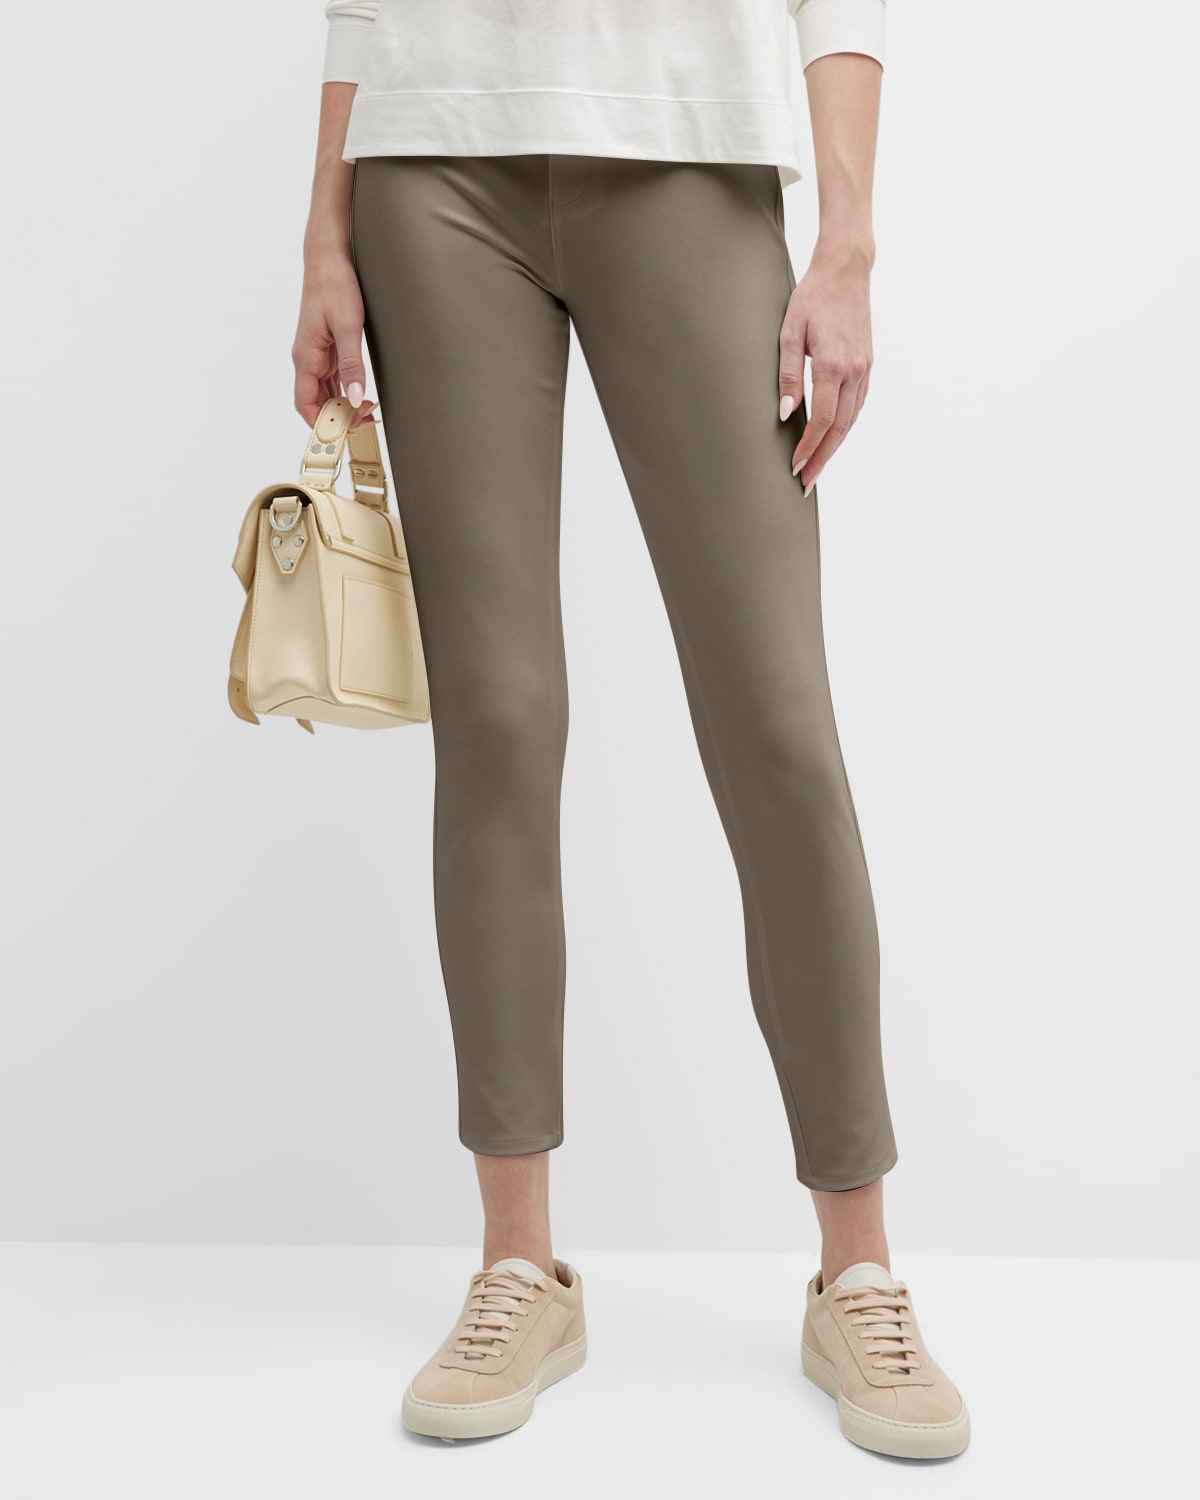 Lafayette 148 Petite Mercer Acclaimed Stretch Skinny Pants In Nougat